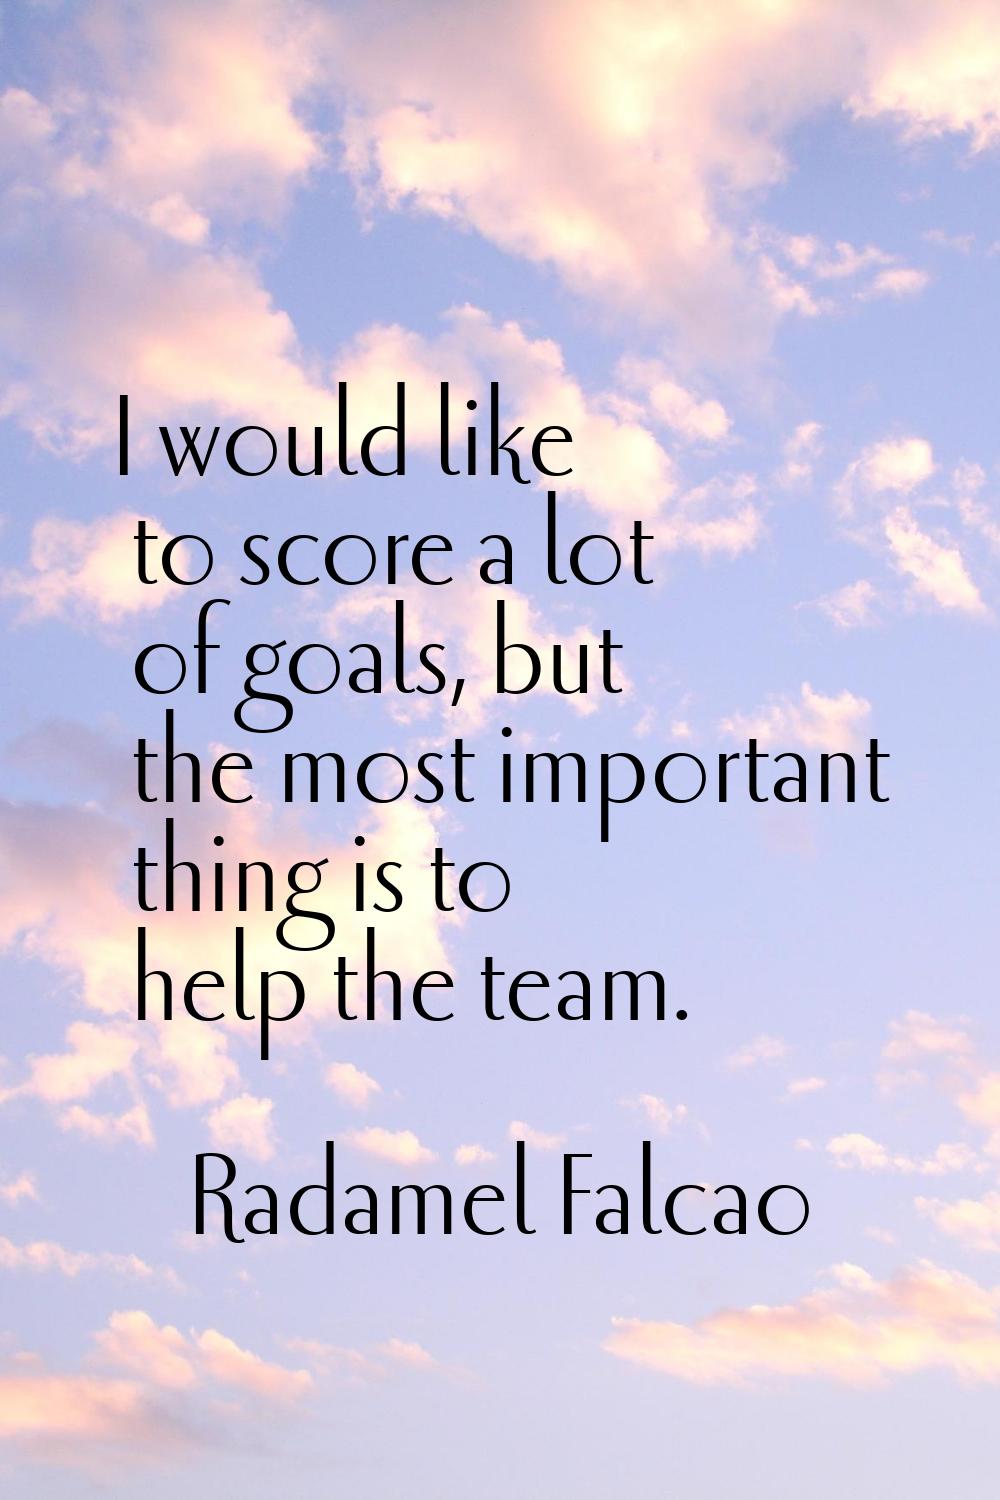 I would like to score a lot of goals, but the most important thing is to help the team.